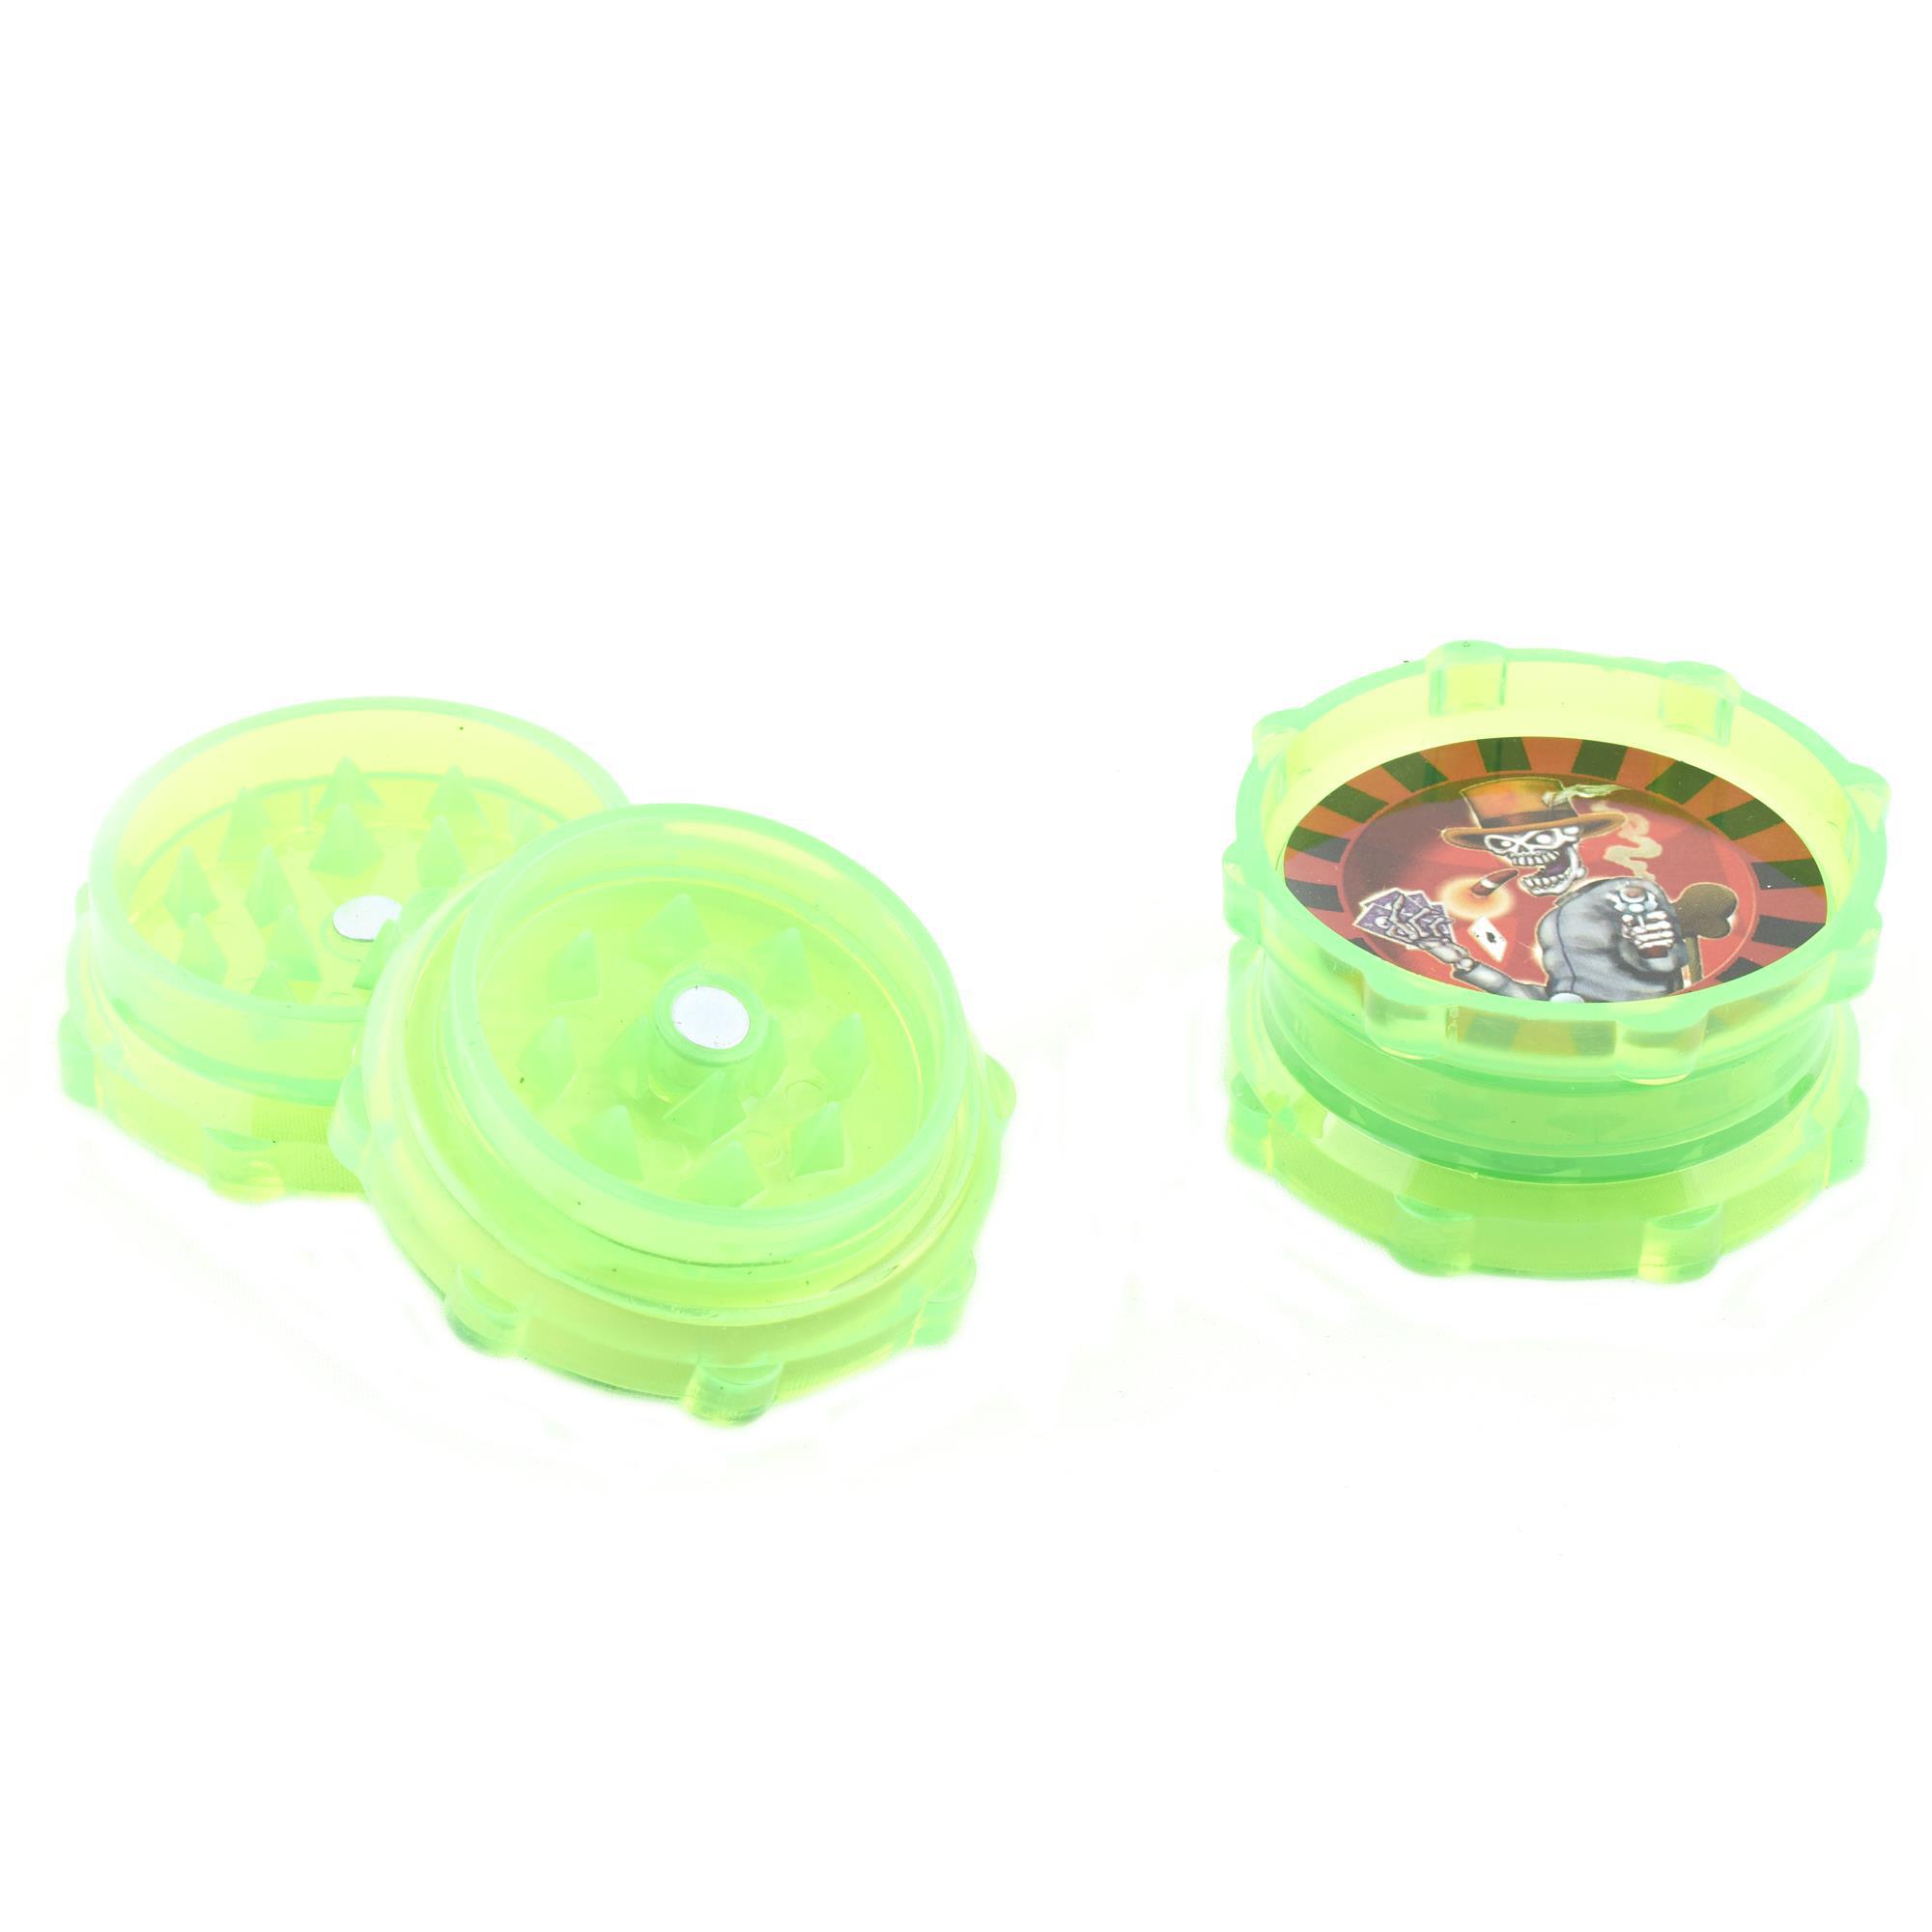 COLORED ACRYLIC GRINDER